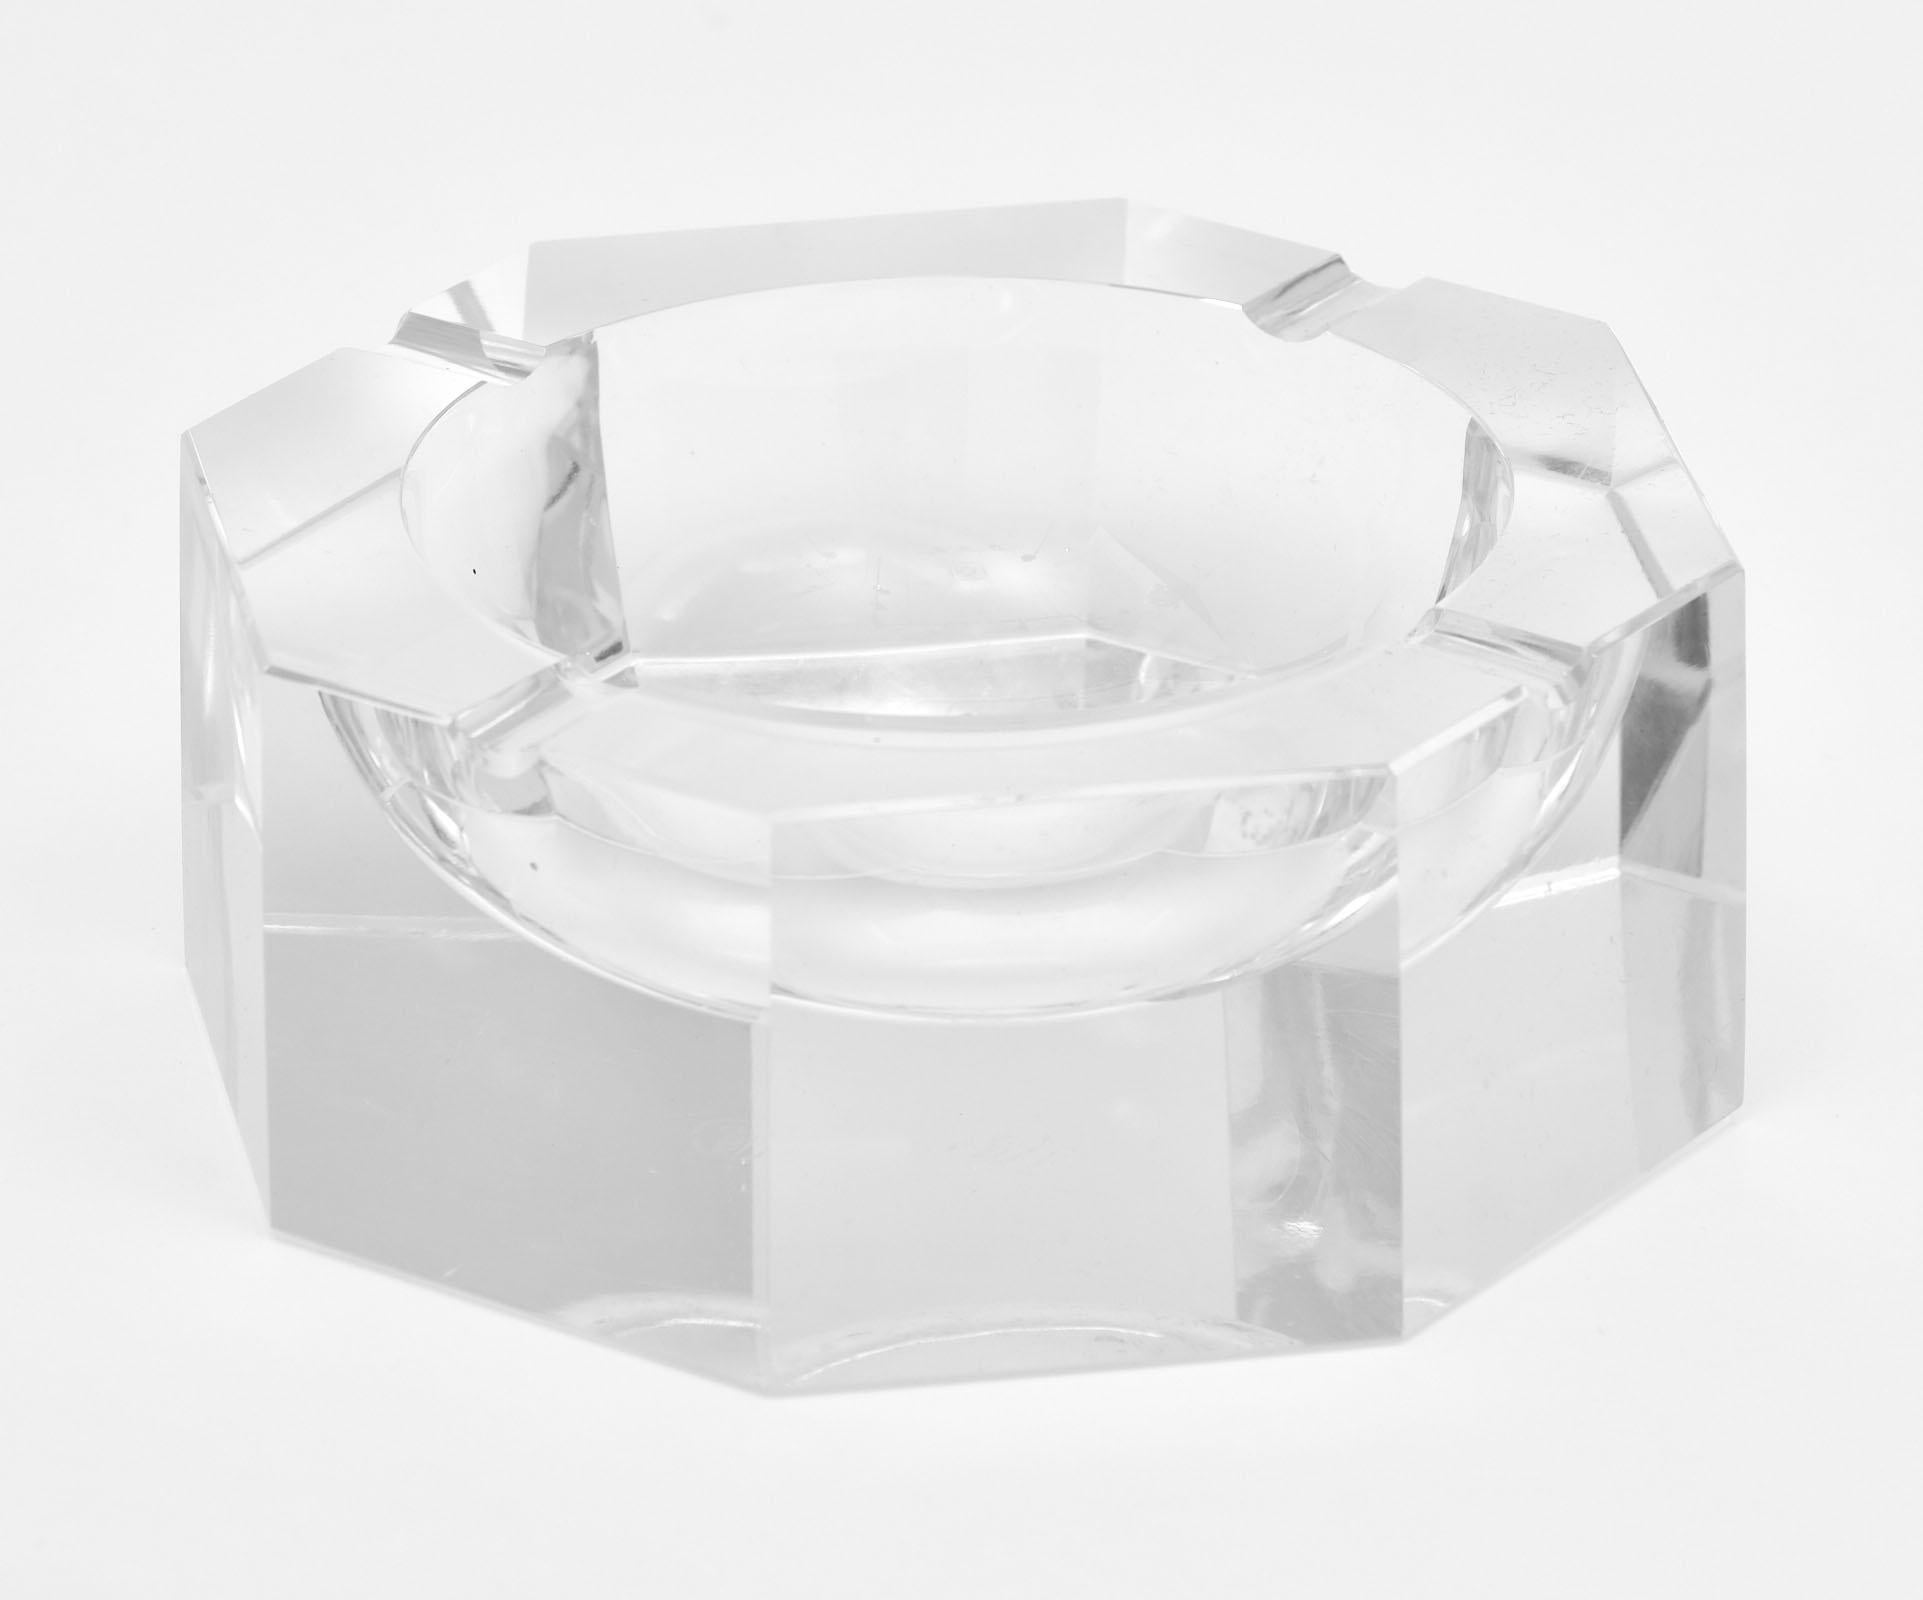 “Moser” cut crystal bowl or ashtray. We love the simplicity and style of this piece.